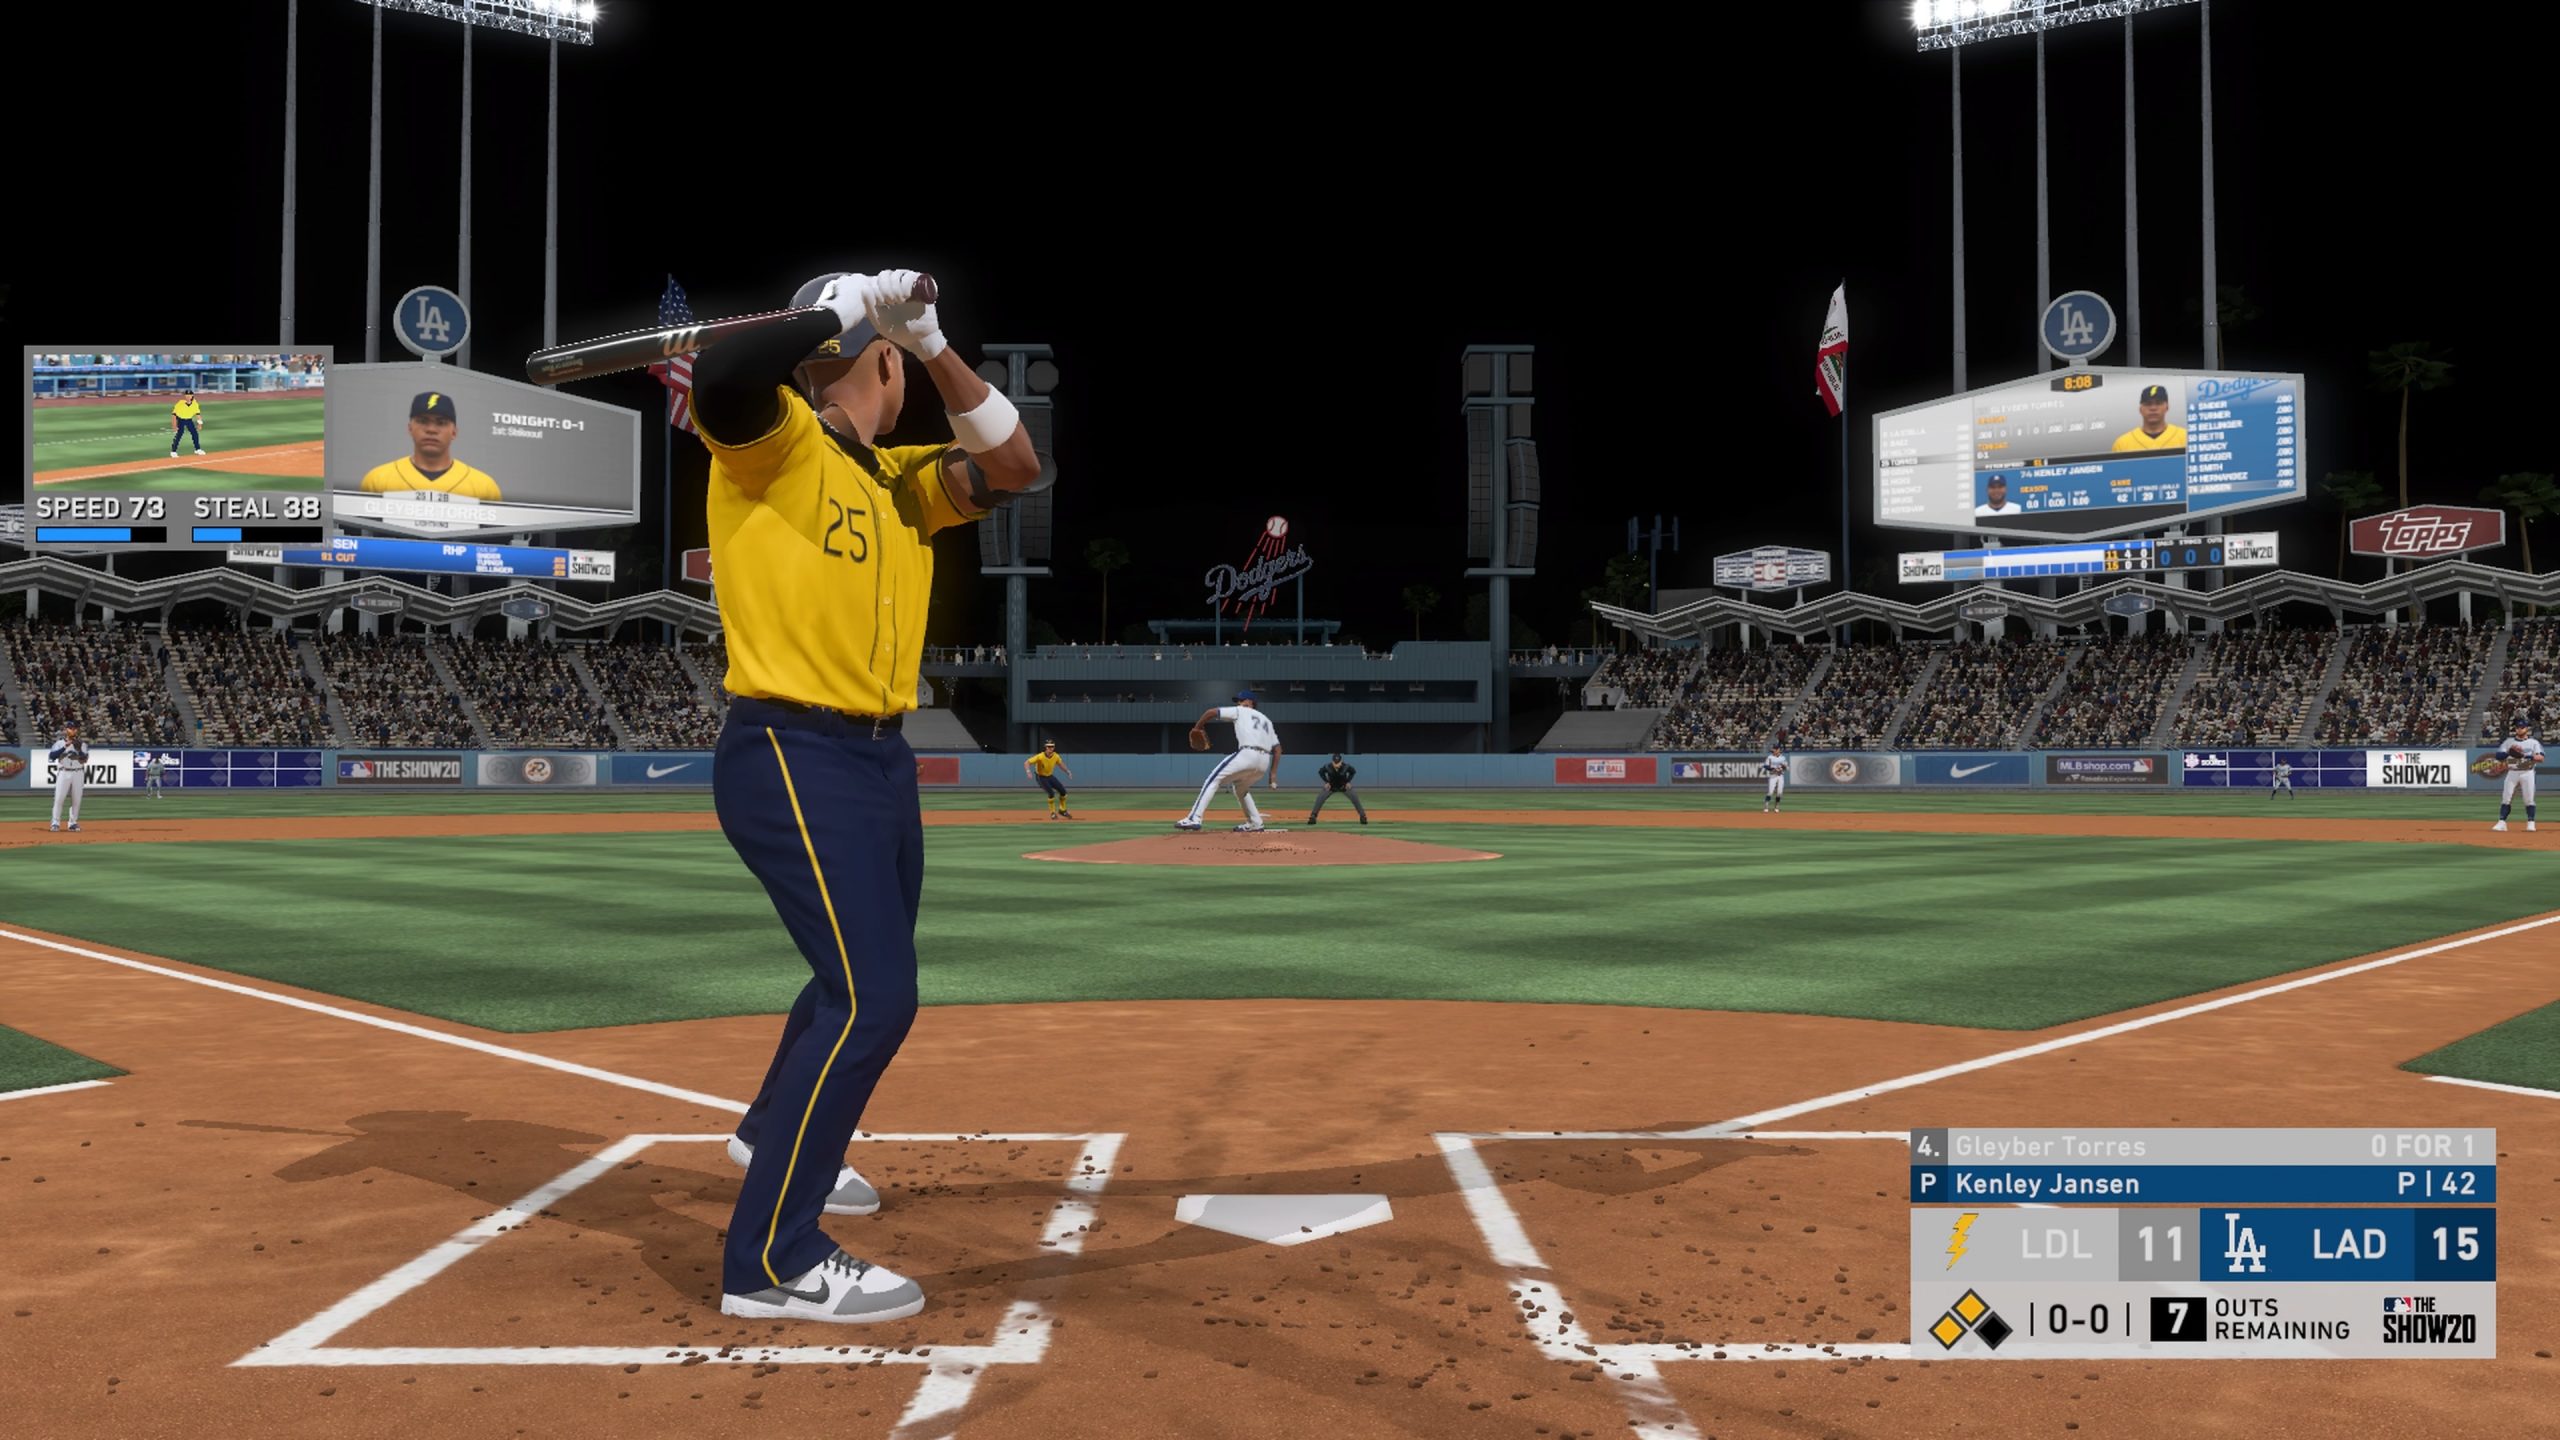 MLB The Show 20 1.06 Update Patch Notes Revealed Just Push Start